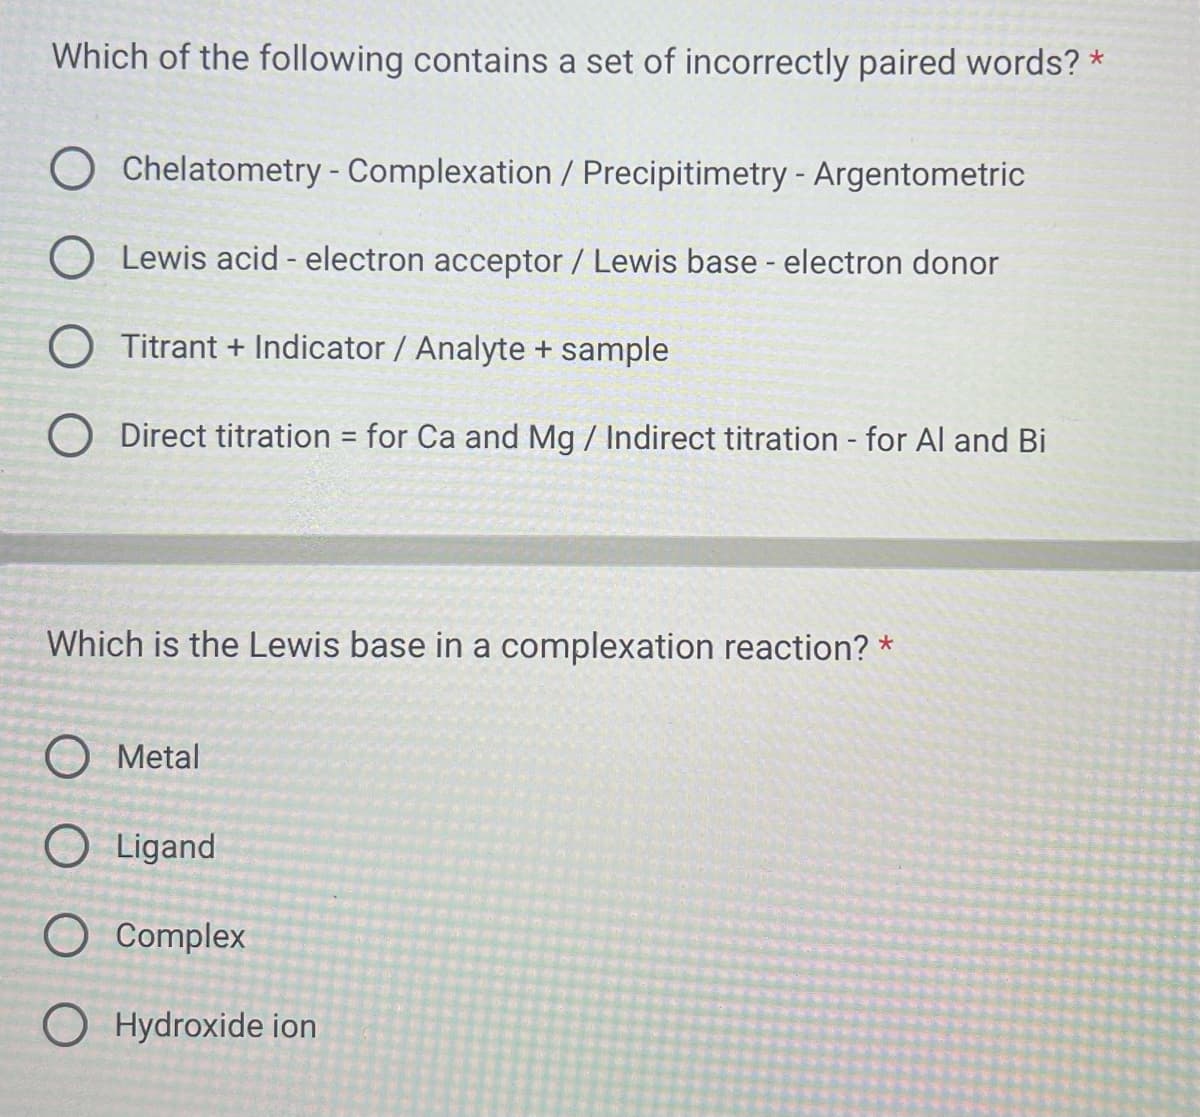 Which of the following contains a set of incorrectly paired words? *
Chelatometry - Complexation / Precipitimetry - Argentometric
O Lewis acid - electron acceptor / Lewis base - electron donor
O Titrant + Indicator / Analyte + sample
O Direct titration for Ca and Mg / Indirect titration - for Al and Bi
Which is the Lewis base in a complexation reaction? *
Metal
O Ligand
-
Complex
OHydroxide ion